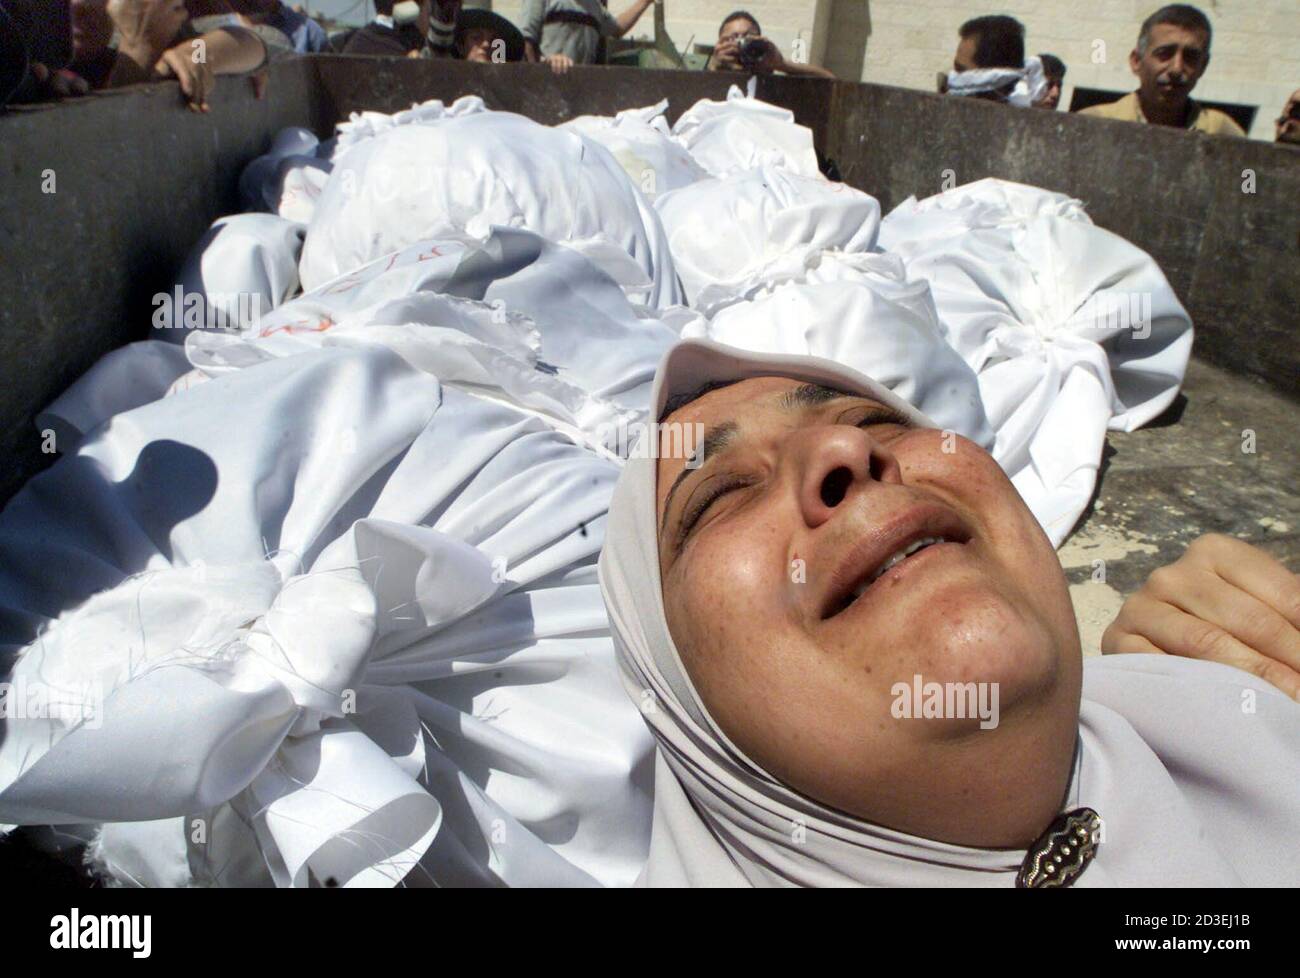 A Palestinian woman cries next to bodies of Palestinians killed in Jenin refugee camp April 19, 2002. [Thirty-five Palestinians swathed in white shrouds and some decked with purple flowers were buried on Friday in common graves in an olive grove on the edge of the Jenin refugee camp.  An Israeli army pullout earlier in the day brought no joy to residents of the camp, where so far 39 Palestinians have been confirmed killed in the worst violence of a West Bank blitz Israel launched after a spate of Palestinian suicide bombings] Stock Photo